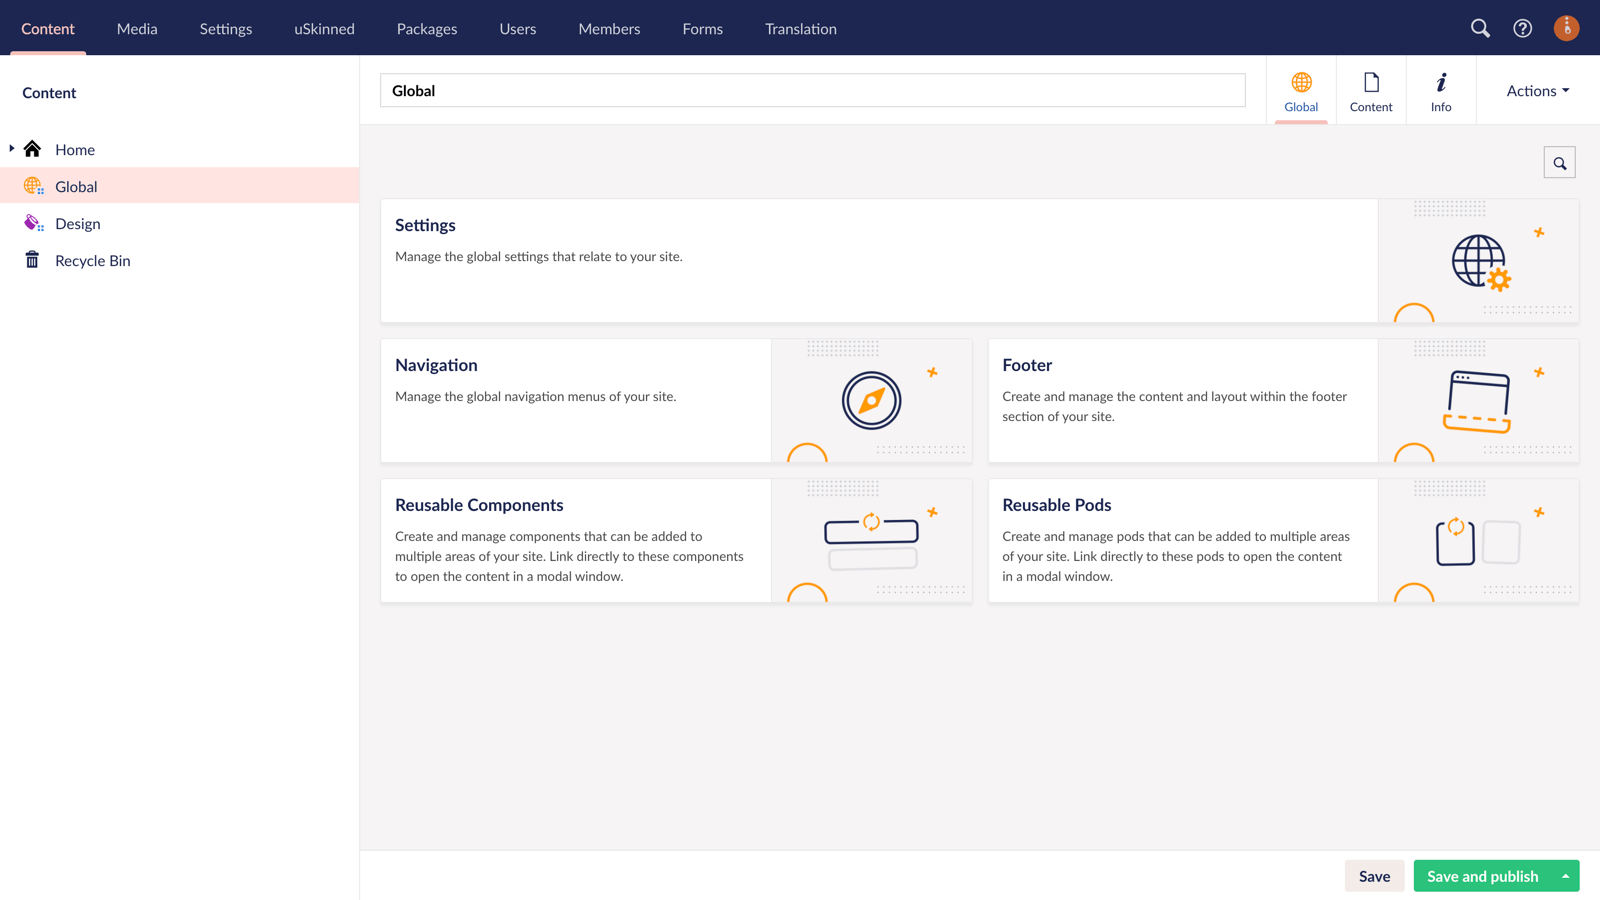 Global content redesign in uSkinned for Umbraco.